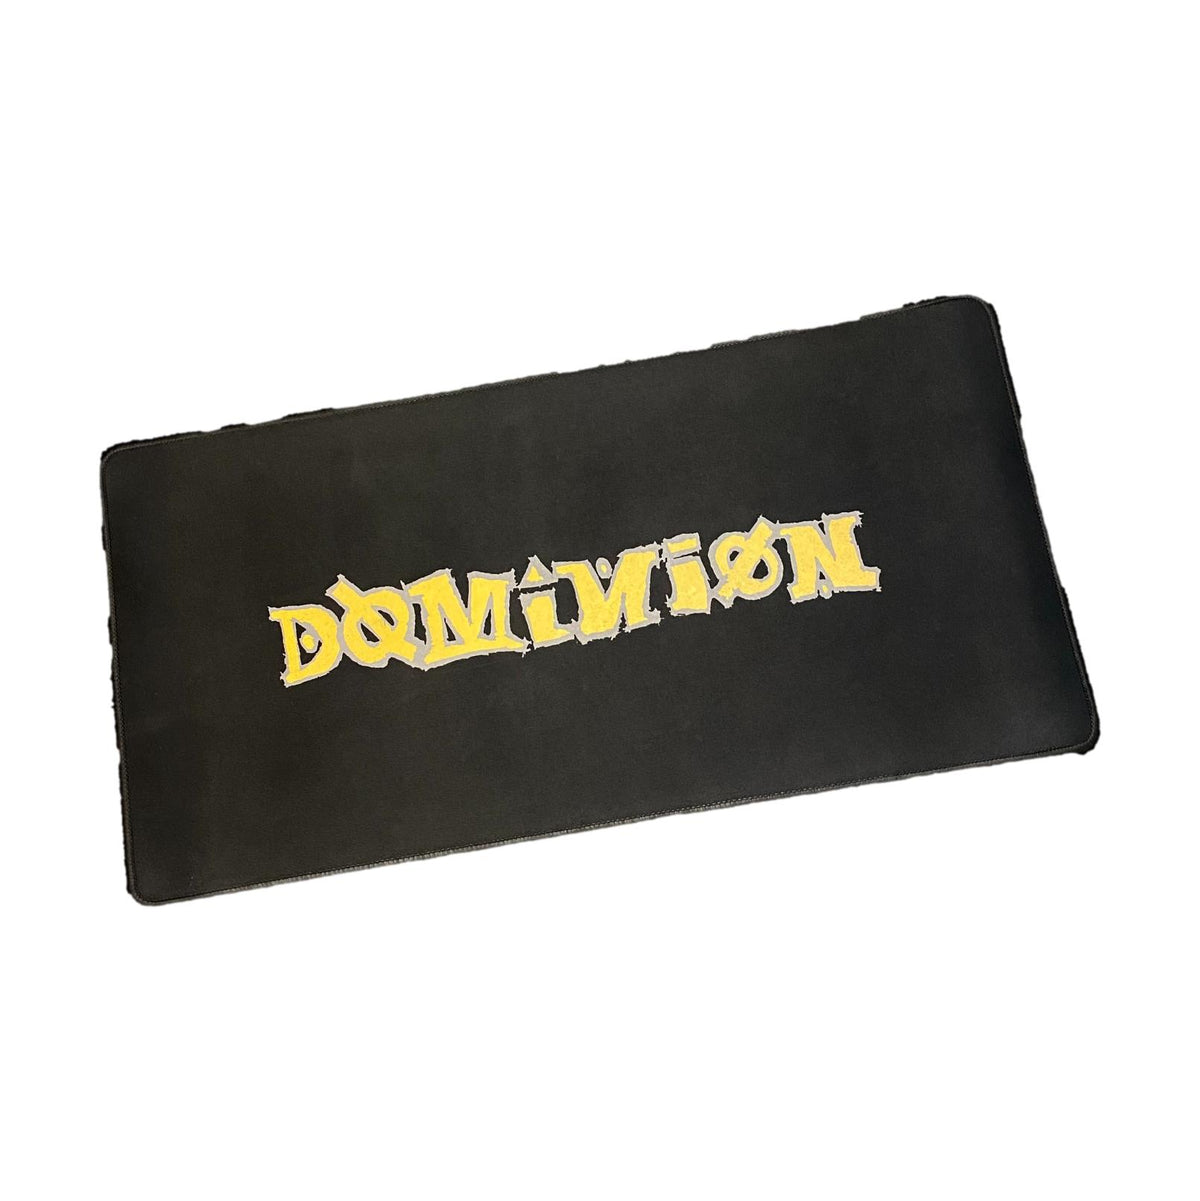 Venue Dominion Scratchy Logo Gaming Mouse Pad - Venue Skateboards